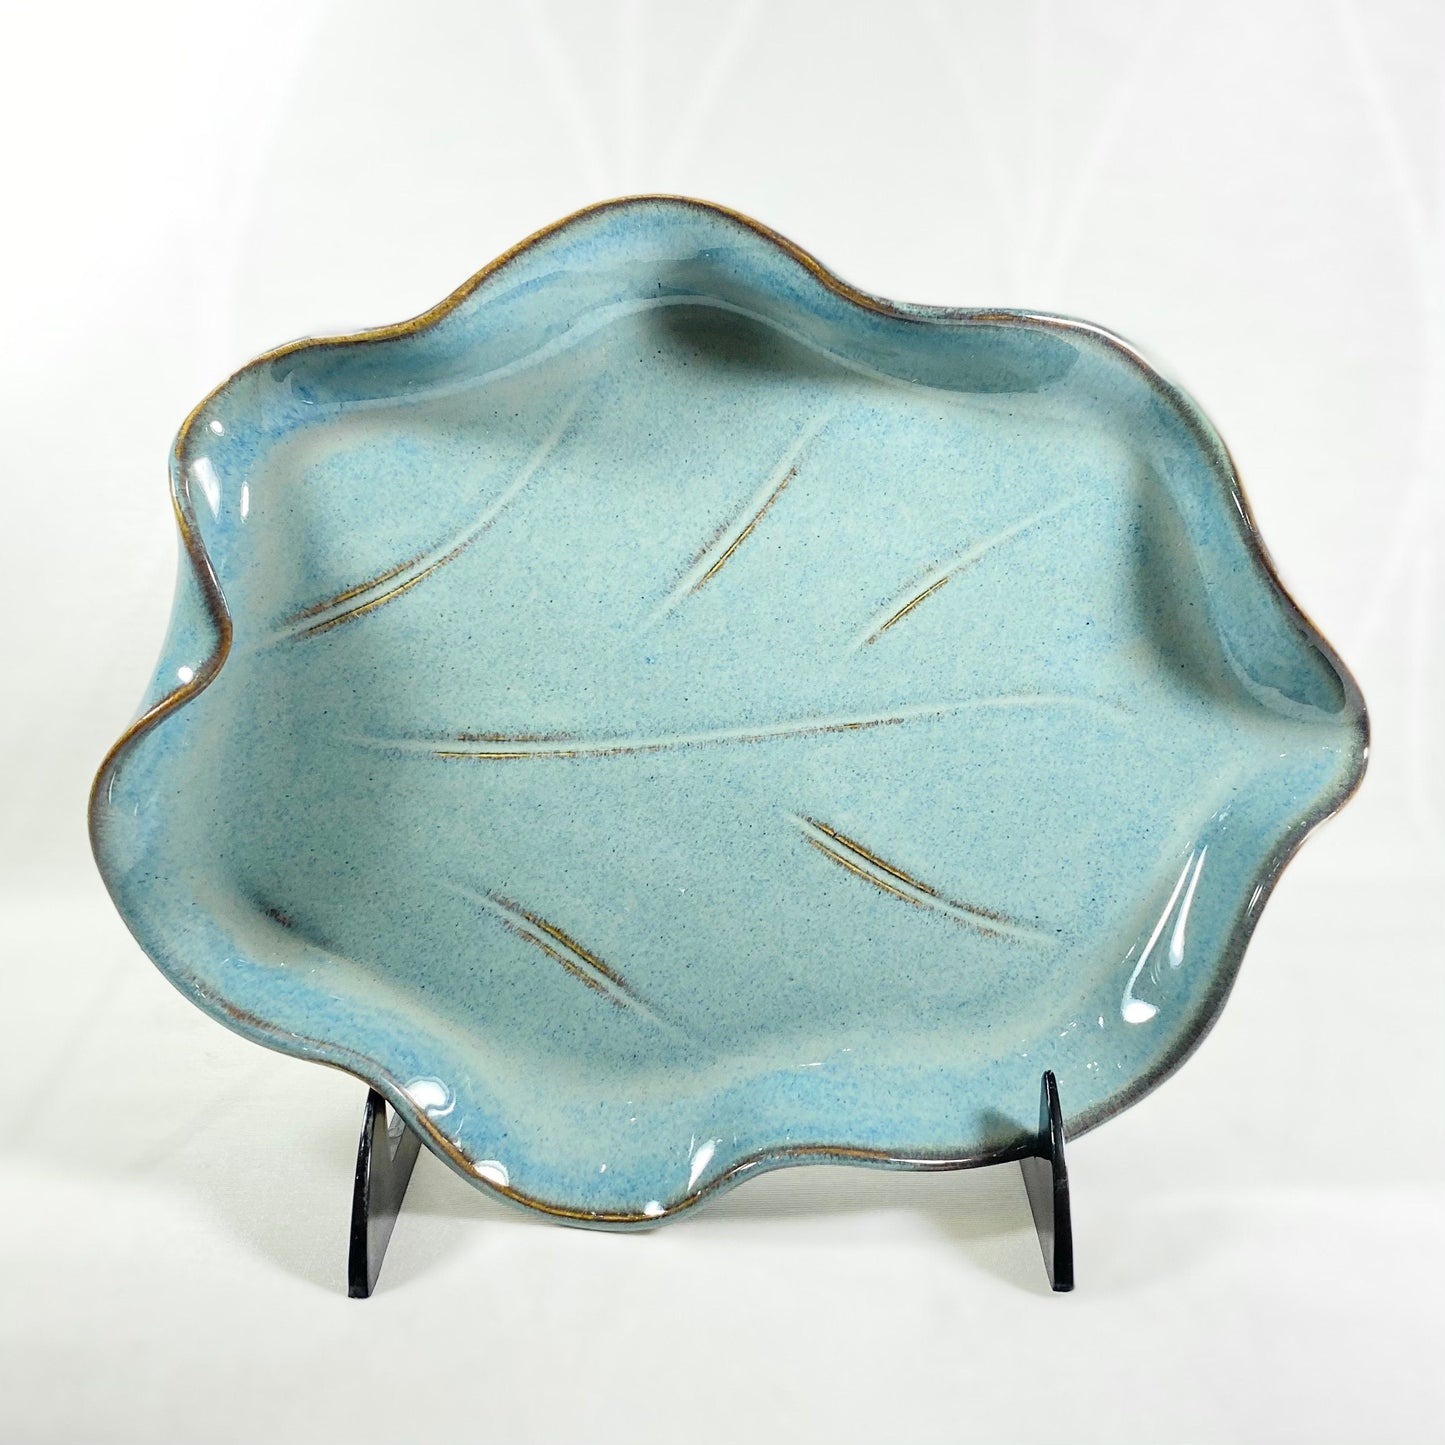 Handmade Light Blue Snack Plate, Functional and Decorative Pottery